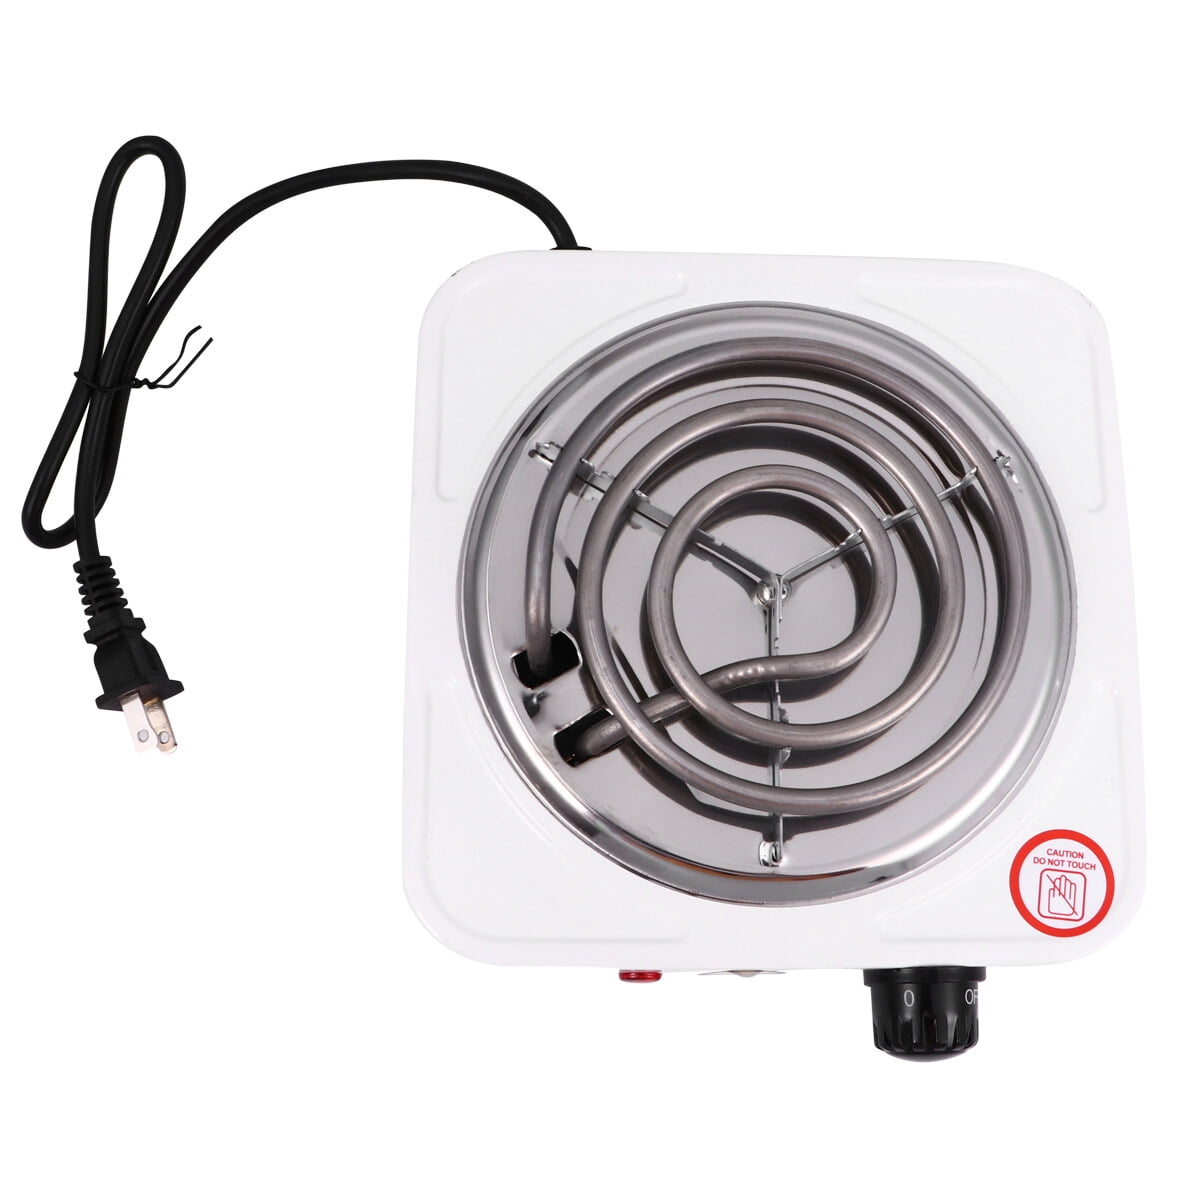 Mgaxyff Stove Cooking Plate,Portable 500W Electric Mini Stove Hot Plate  Multifunction Home Heater (US Plug 110V) 